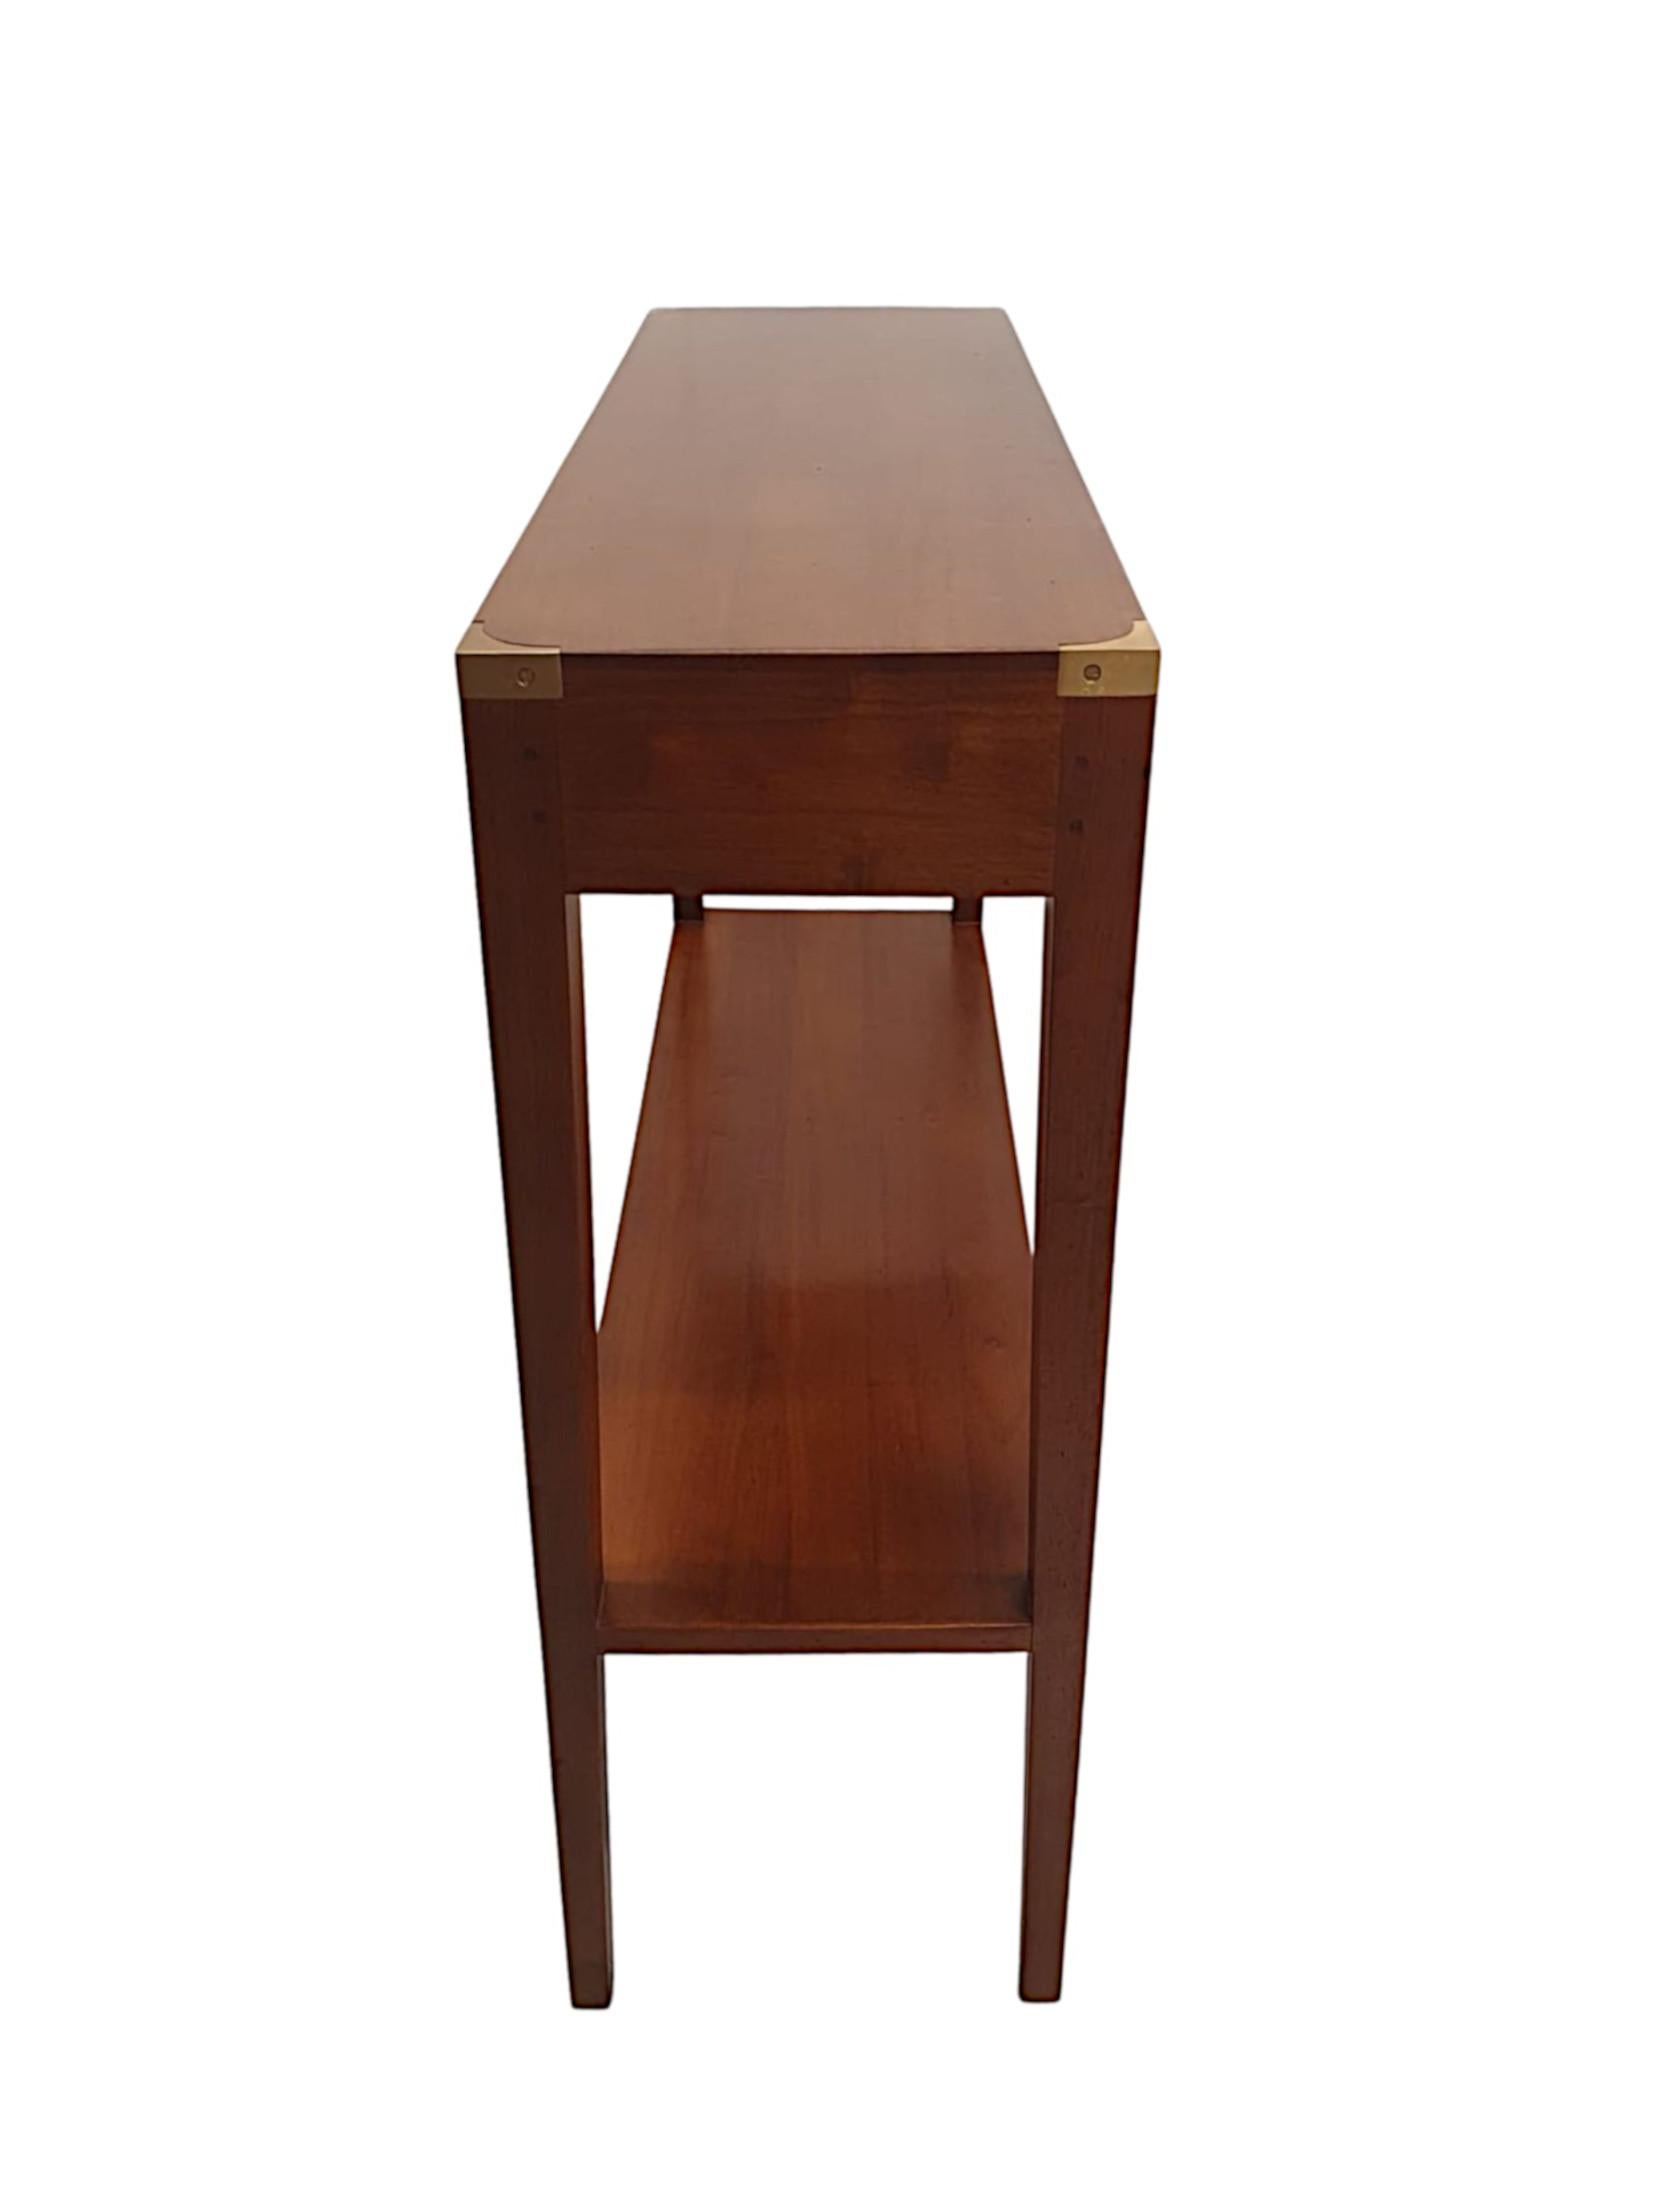 A Fine Campaign Style Cherrywood Console Table In New Condition For Sale In Dublin, IE